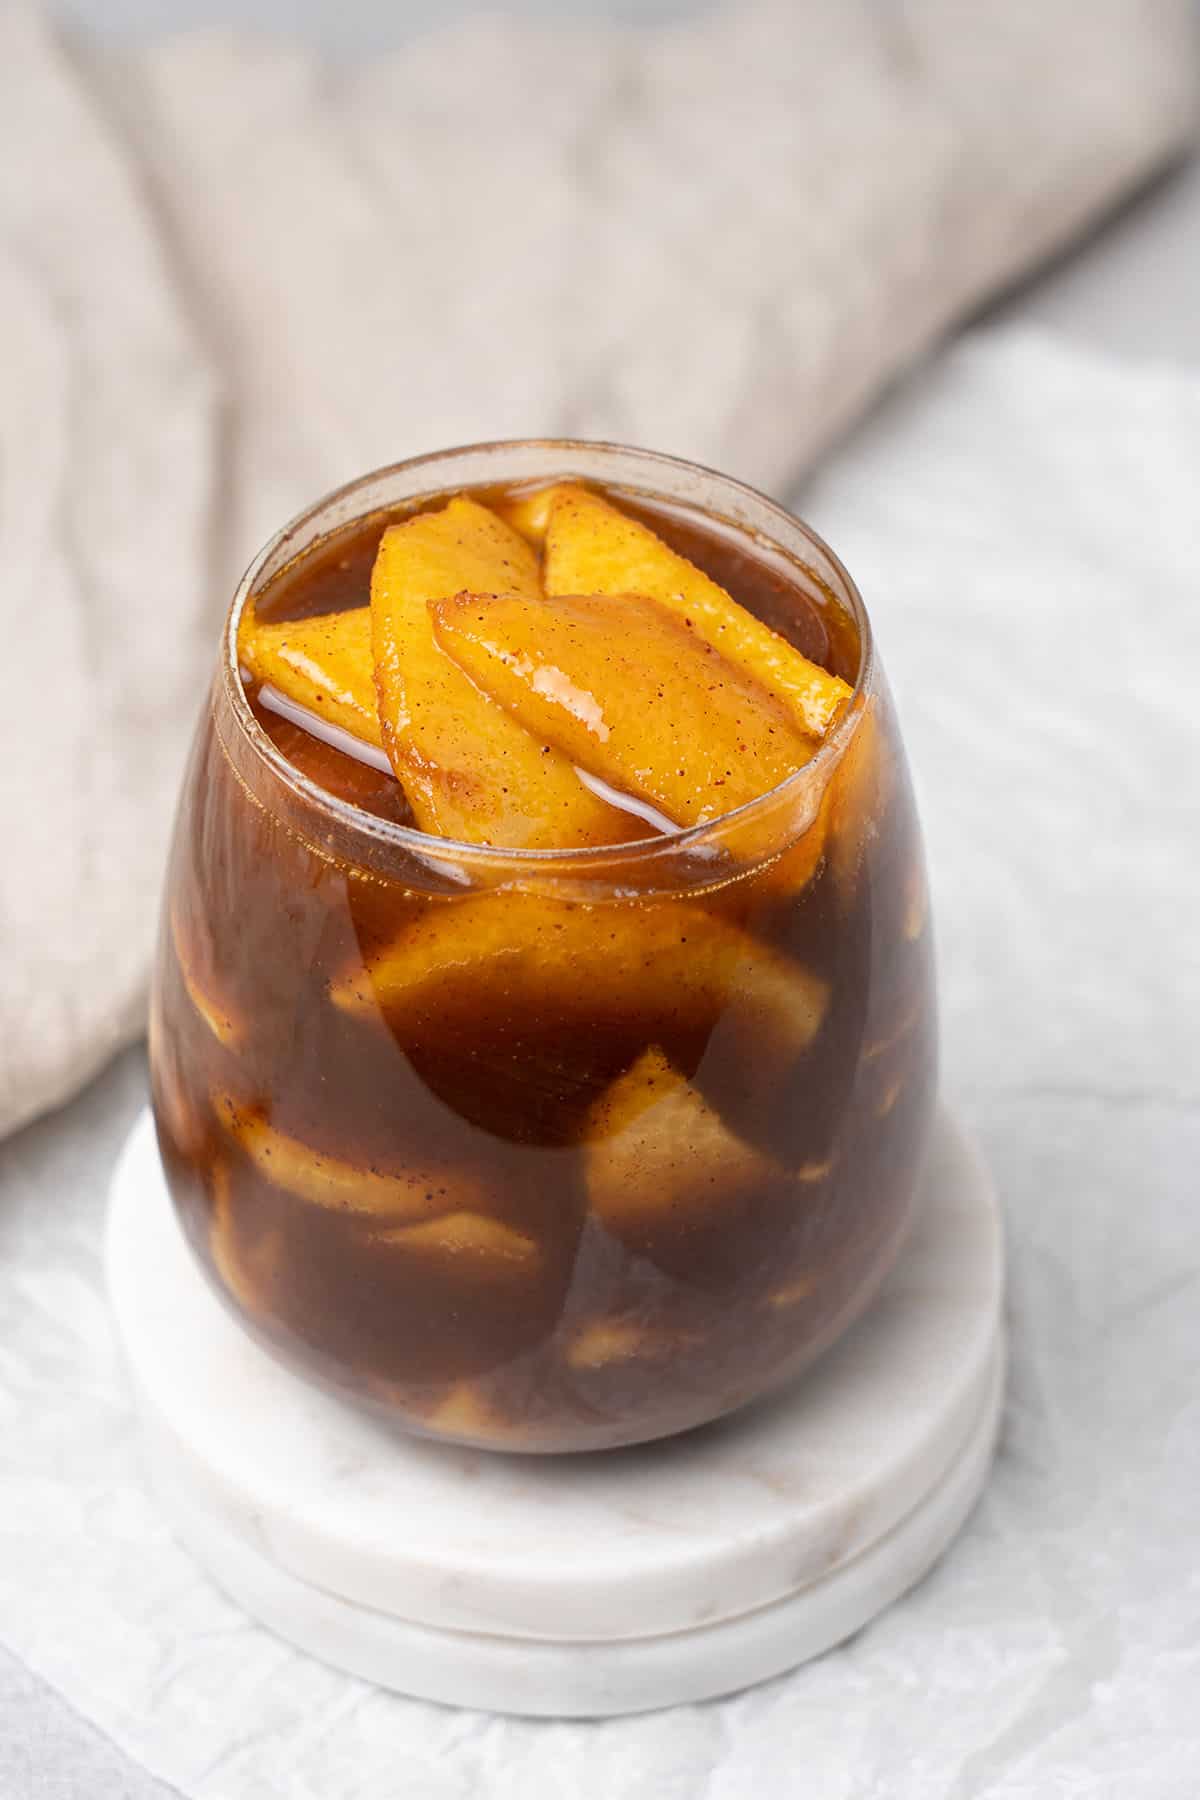 Caramelised Apple topping in a glass.